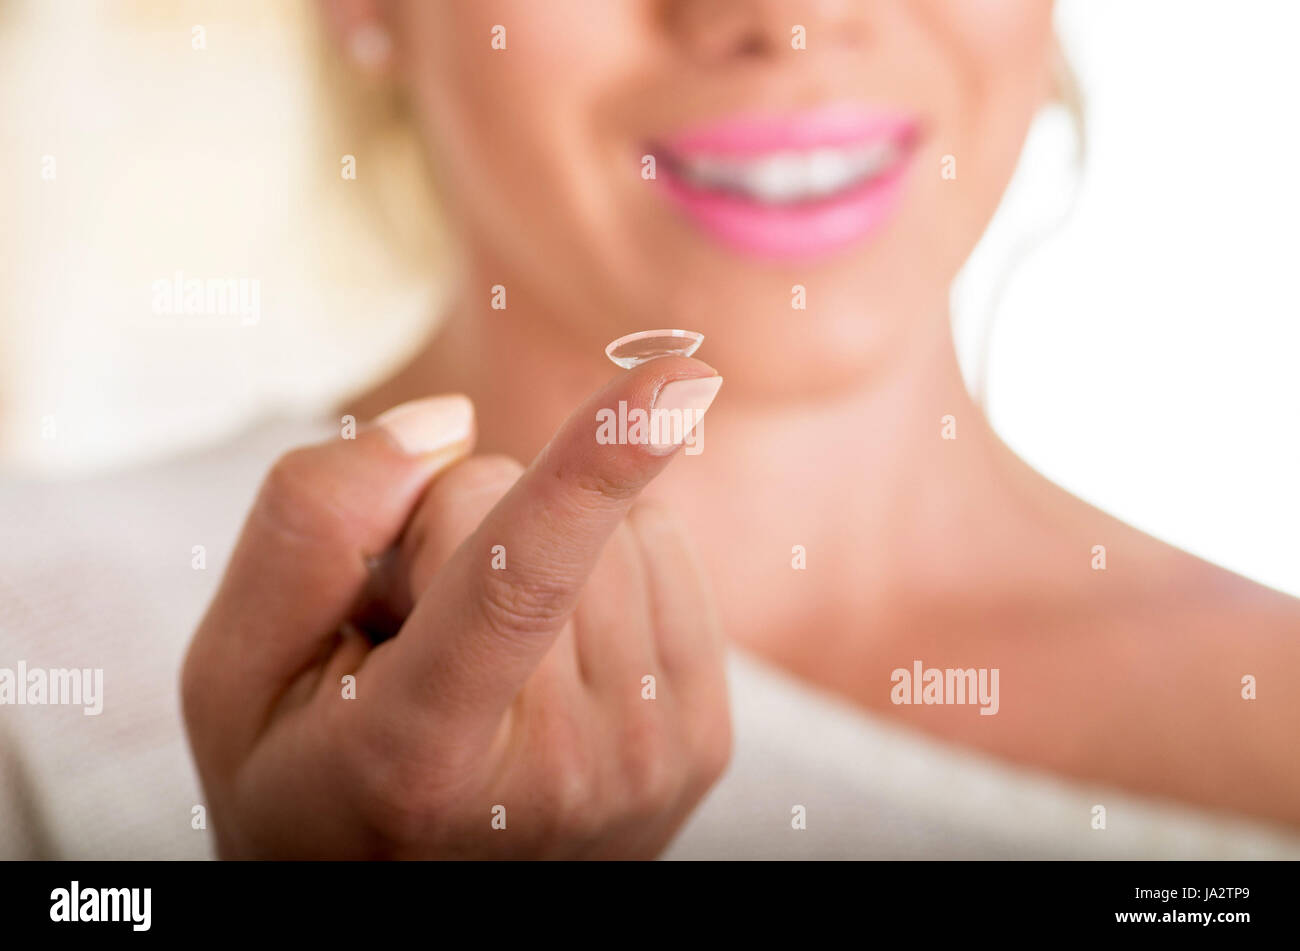 Young woman holding contact lens on finger in front of her face on white background., eyesight and eyecare concept Stock Photo